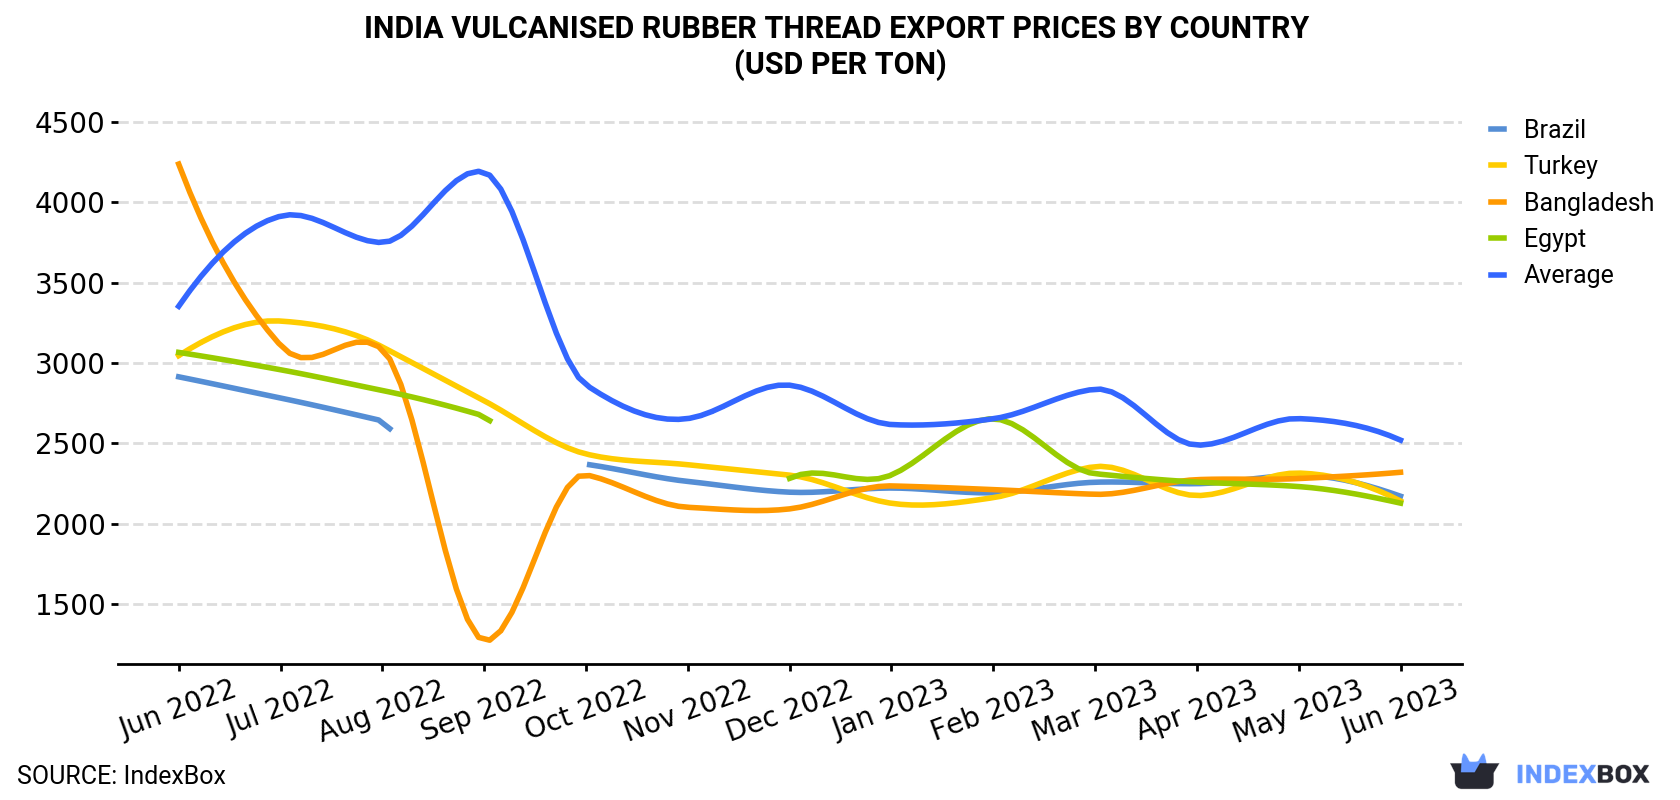 India Vulcanised Rubber Thread Export Prices By Country (USD Per Ton)